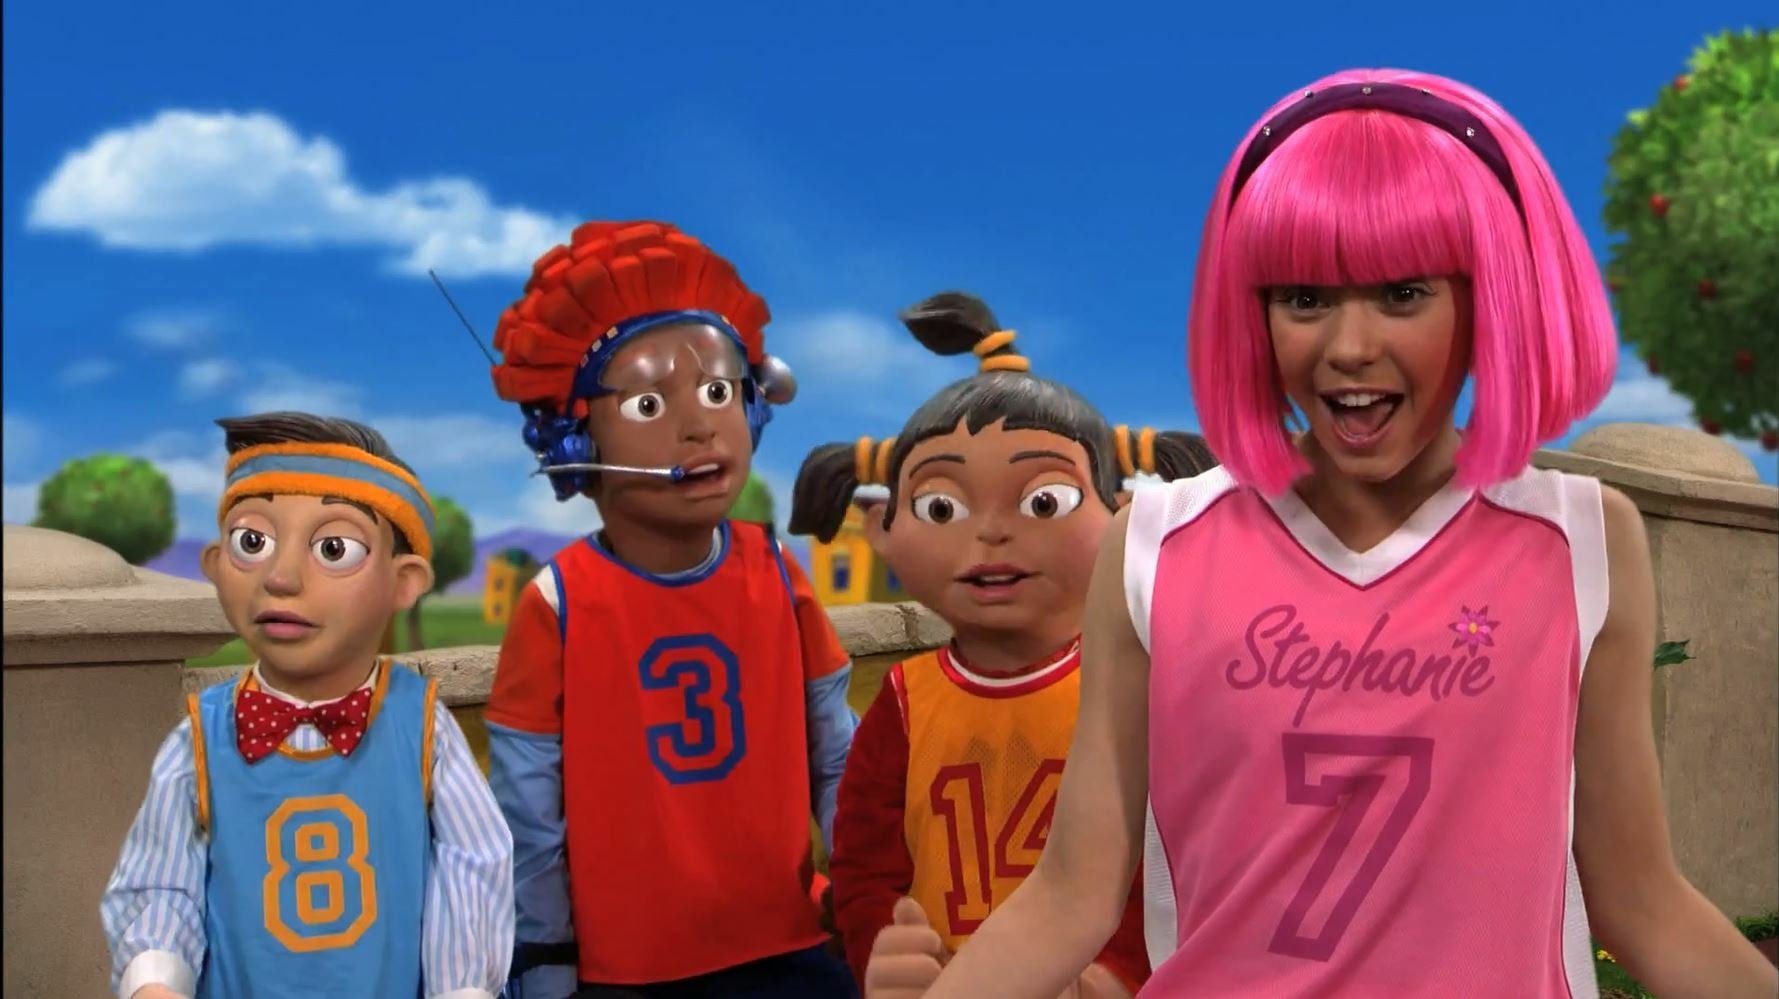 1779x999 LazyTown Wallpaper Background Image. 